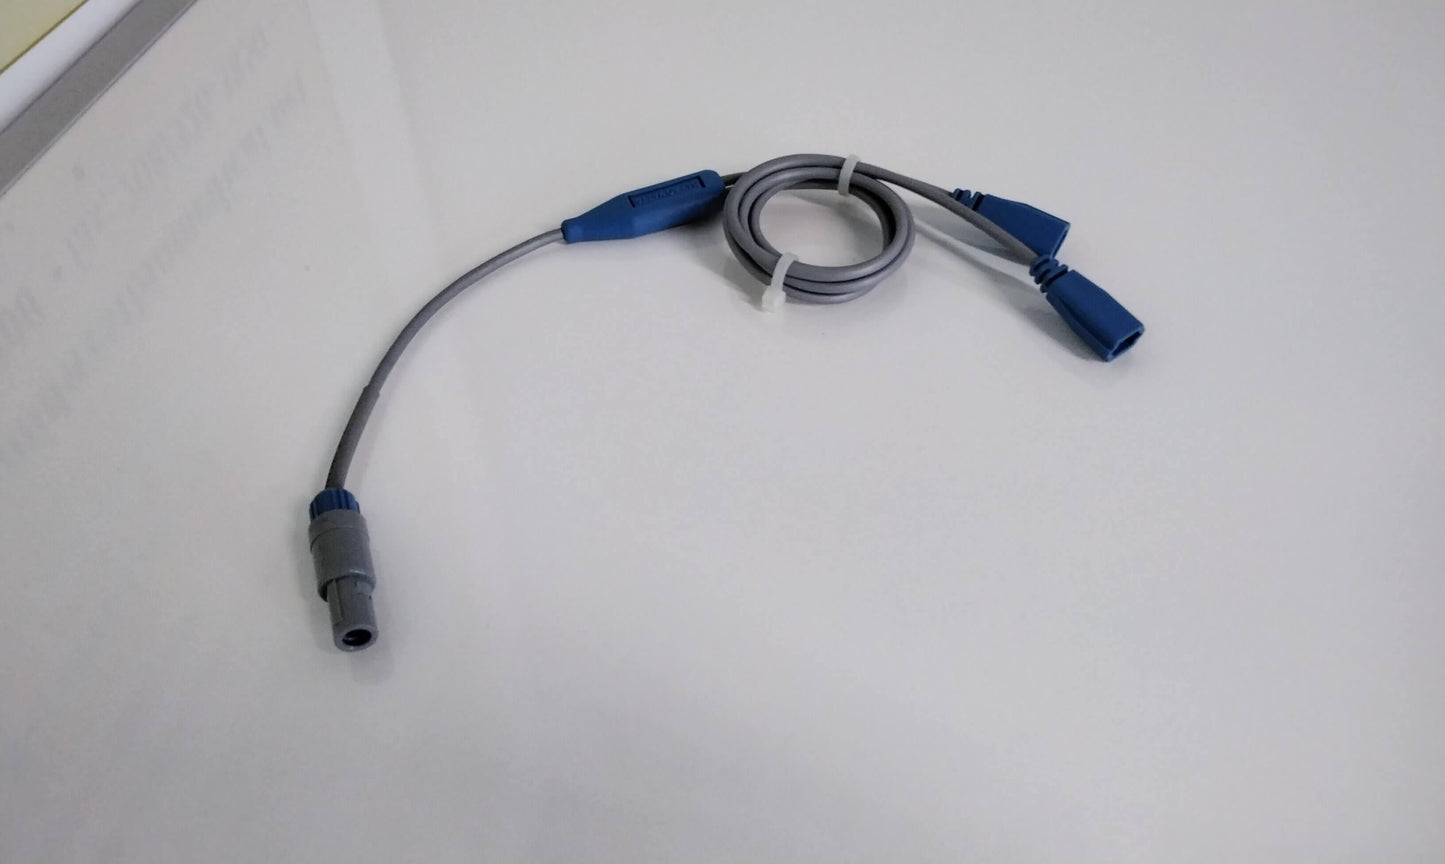 USED Airlife Heated Wire Adapter 0060-23 for Fisher Paykel Humidifiers with Free Shipping and Warranty - MBR Medicals